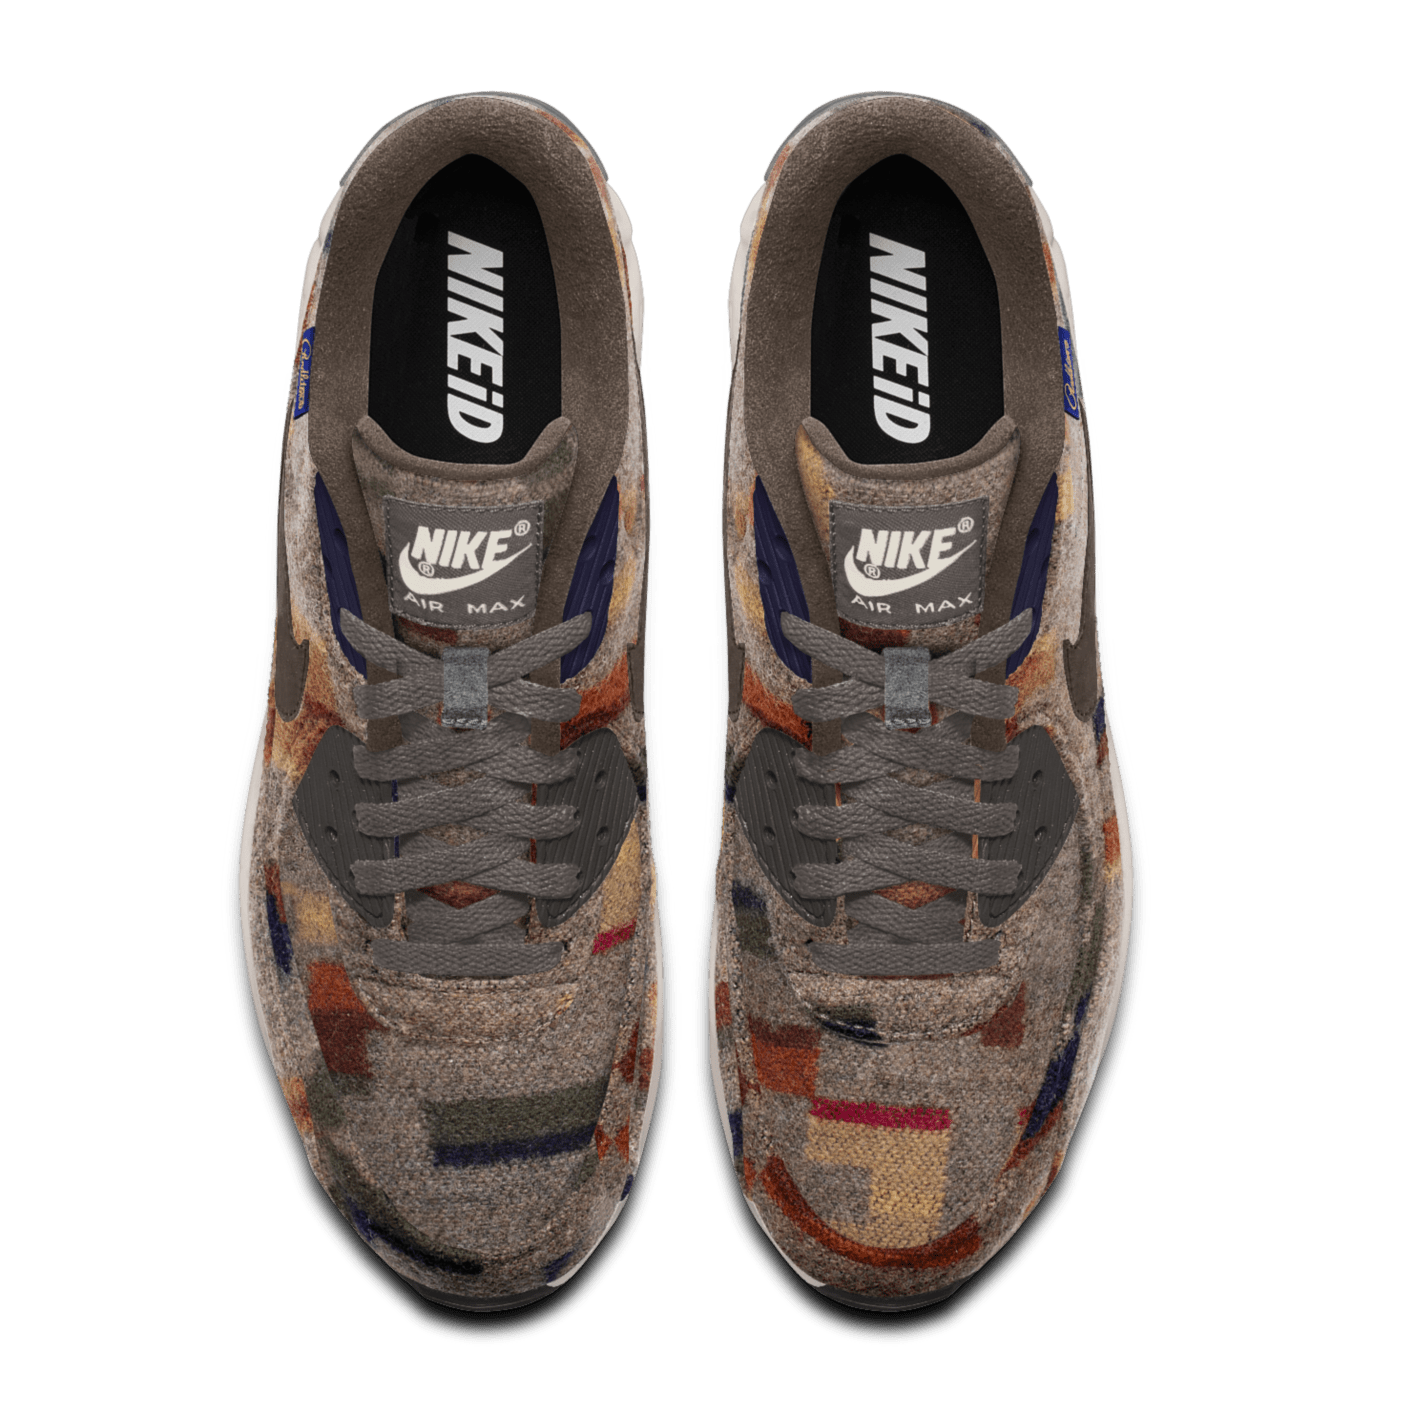 personal Creta Patético Nike Air Max 90 iD Pendleton Available Now | Sole Collector